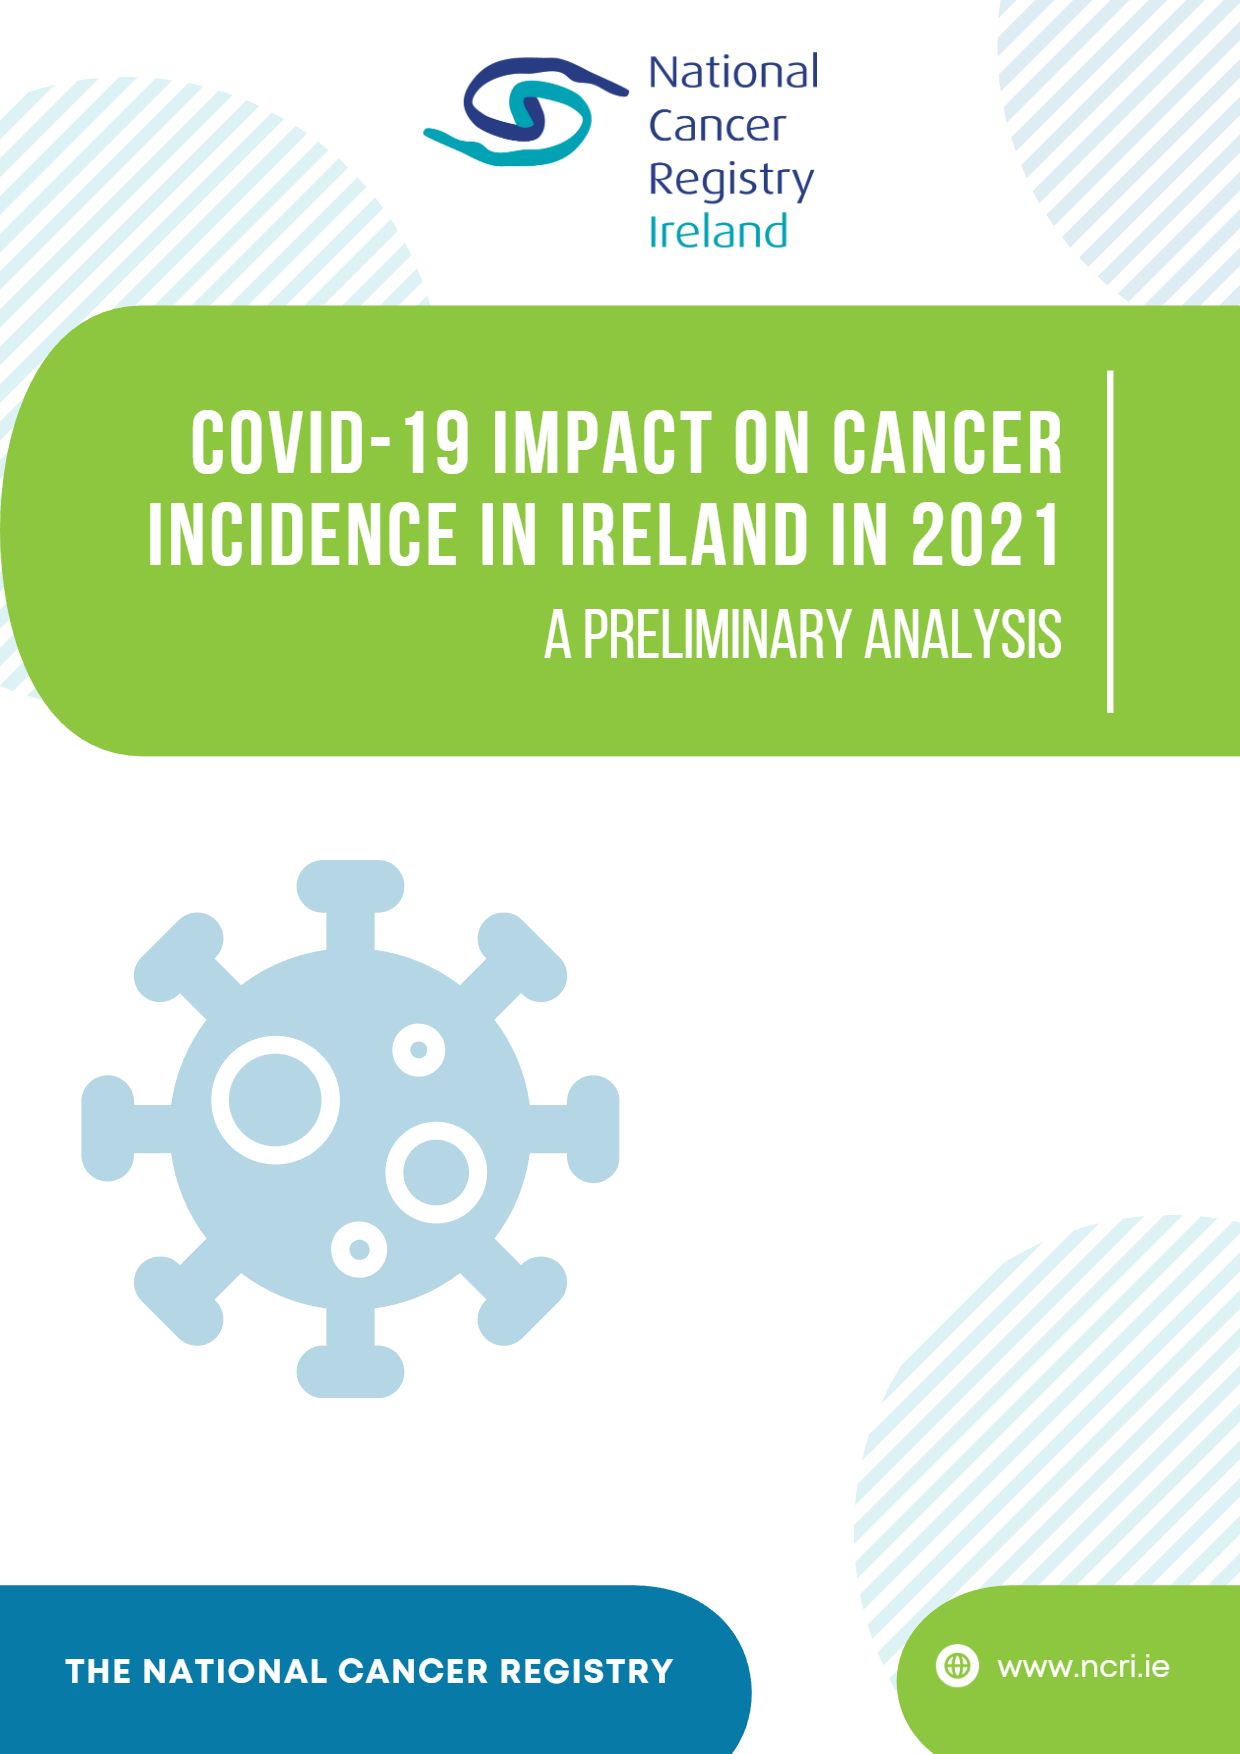  COVID-19 impact on cancer incidence in Ireland in 2021: a preliminary analysis